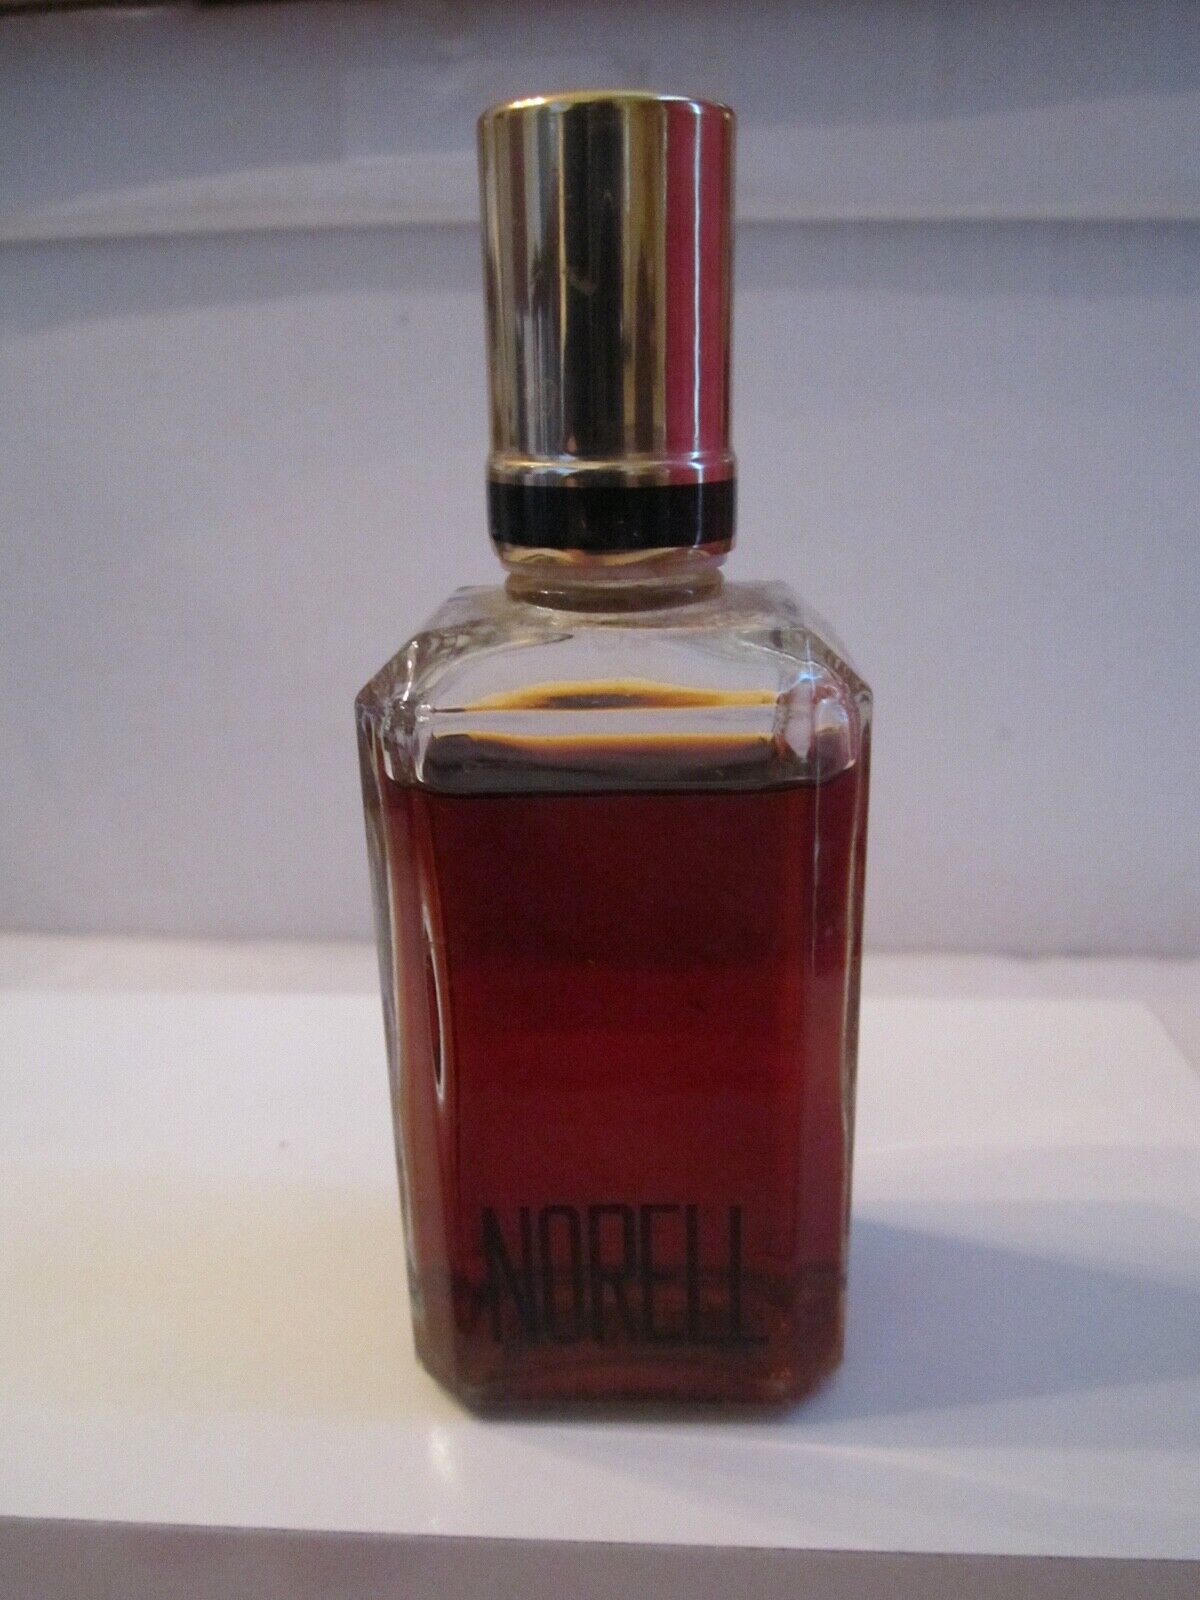 NORELL COLOGNE - 2 1/4 OZ - 95 PERCENT FULL 